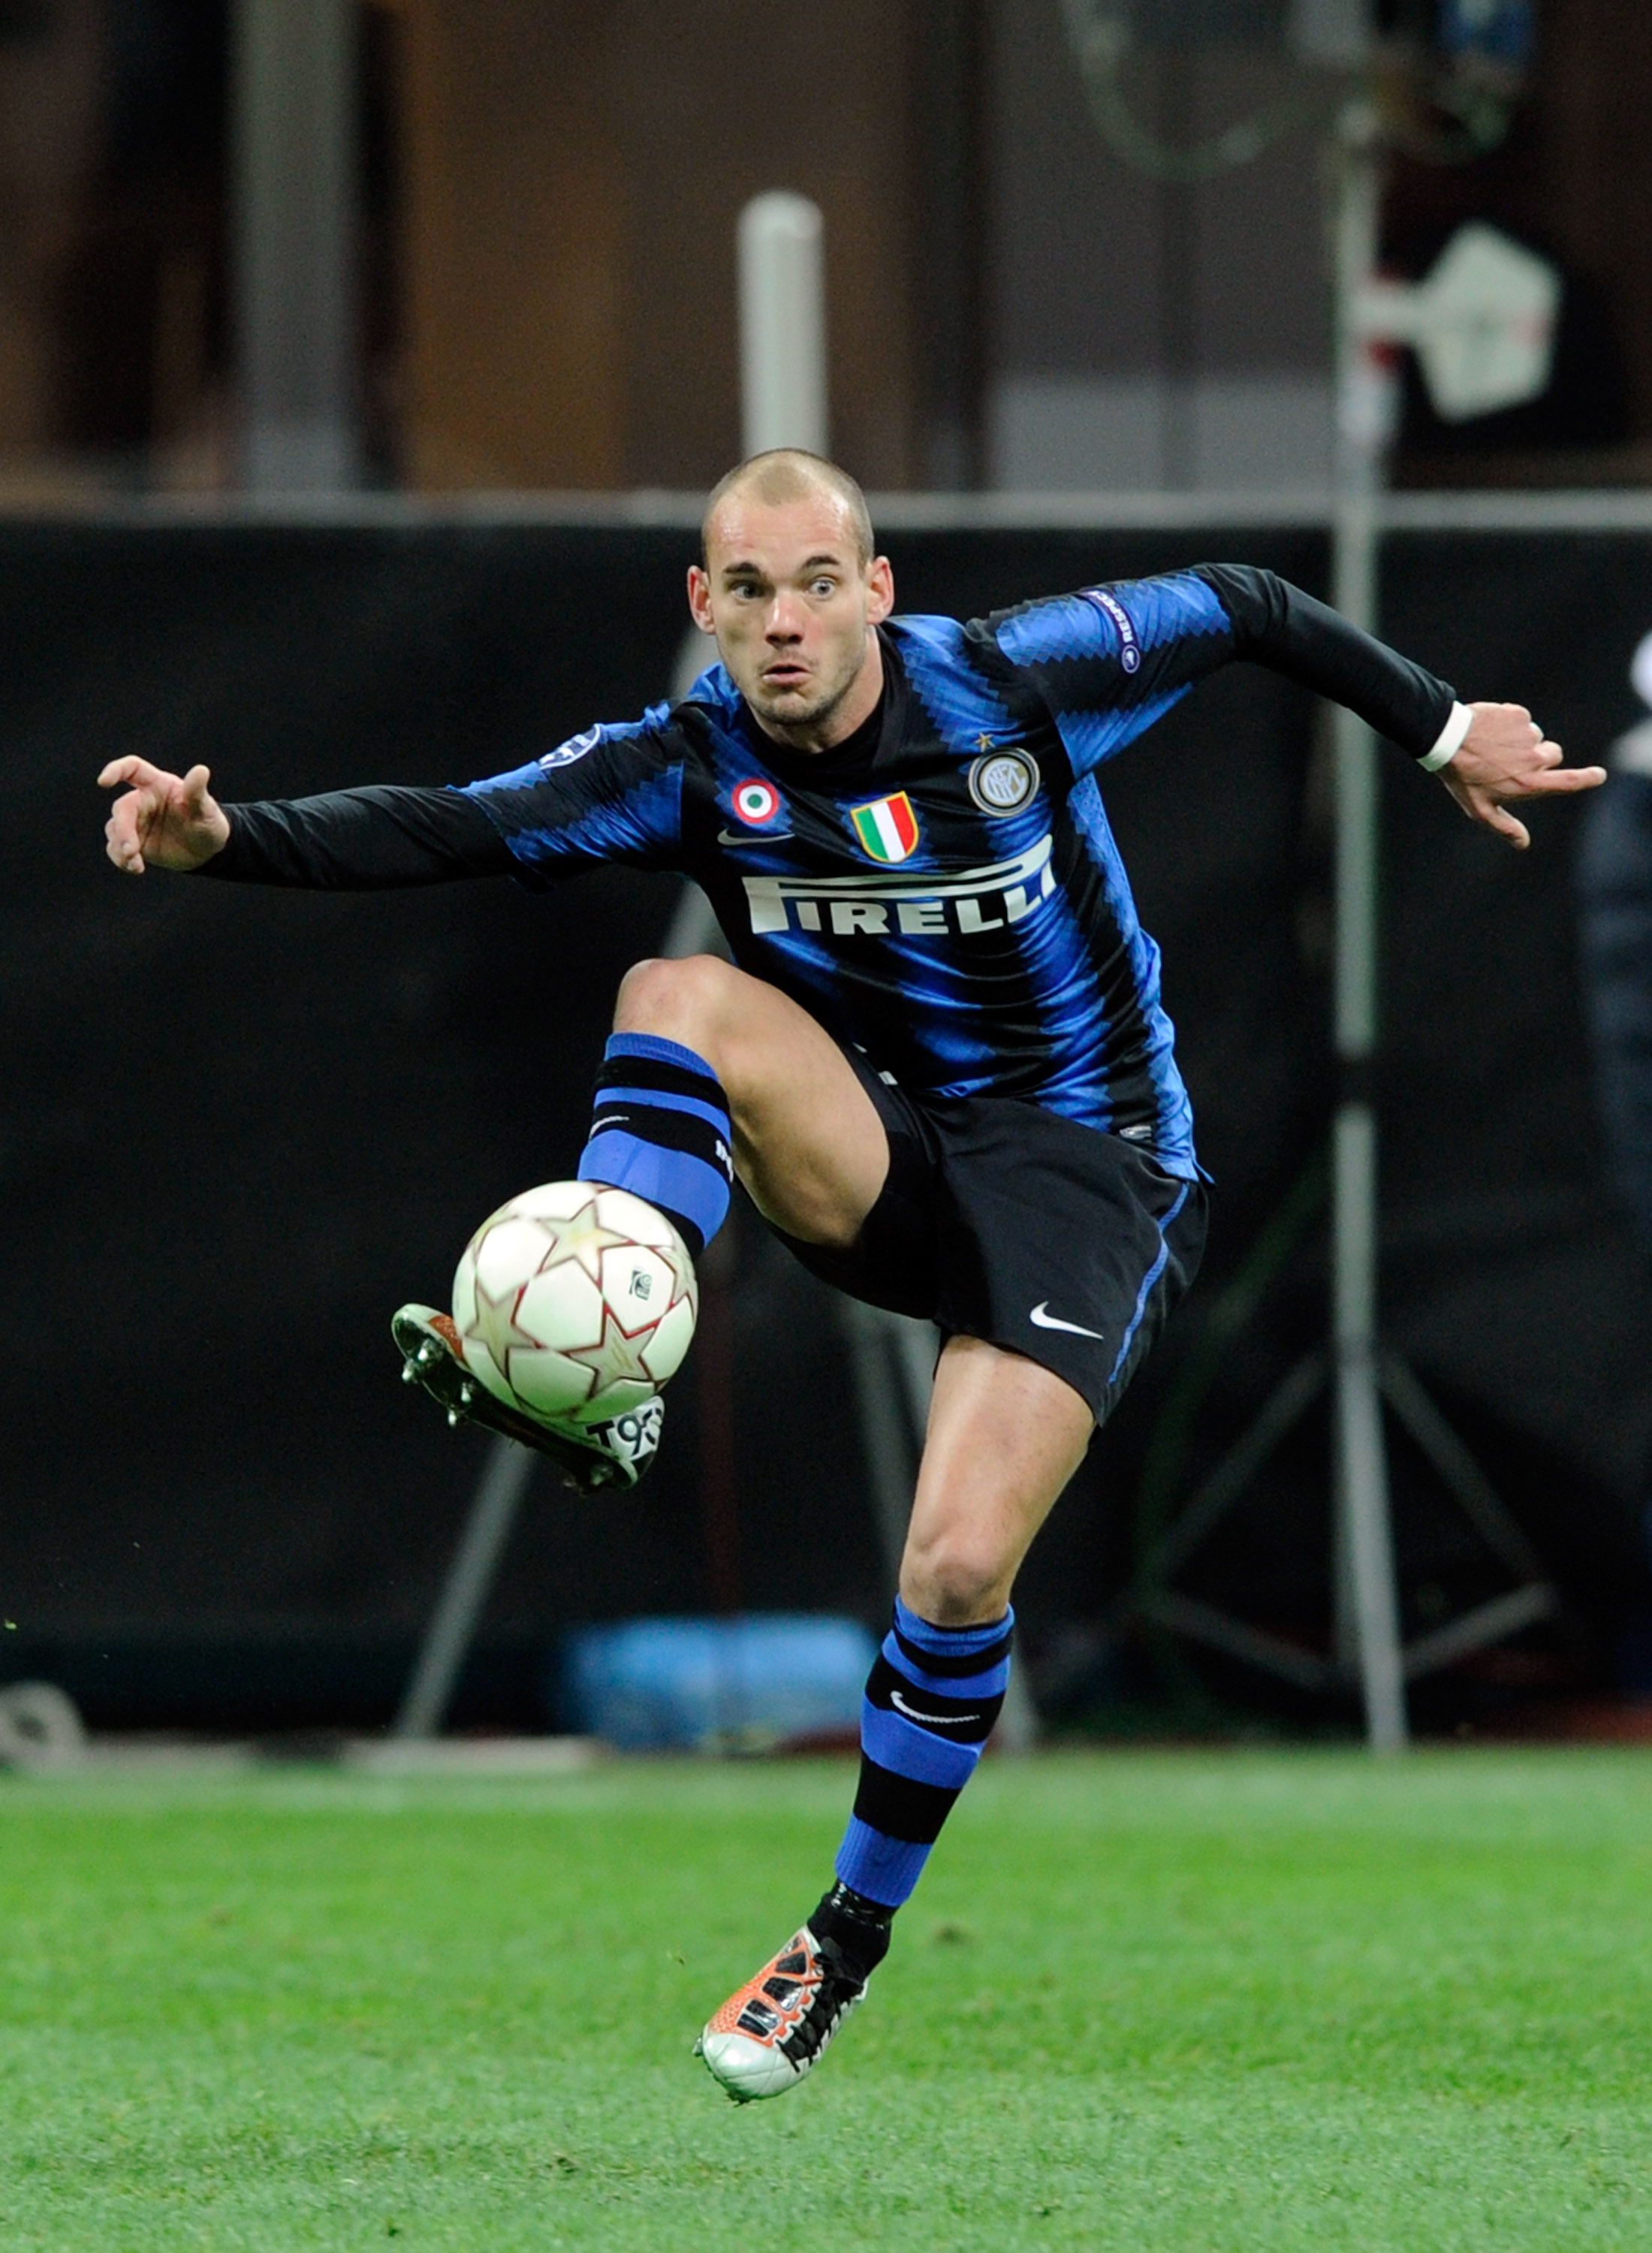 MILAN, ITALY - NOVEMBER 24:  Wesley Sneijder of FC Internazionale Milano during the UEFA Champions League Group A match between FC Internazionale Milano and FC Twente at Stadio Giuseppe Meazza on November 24, 2010 in Milan, Italy.  (Photo by Claudio Villa